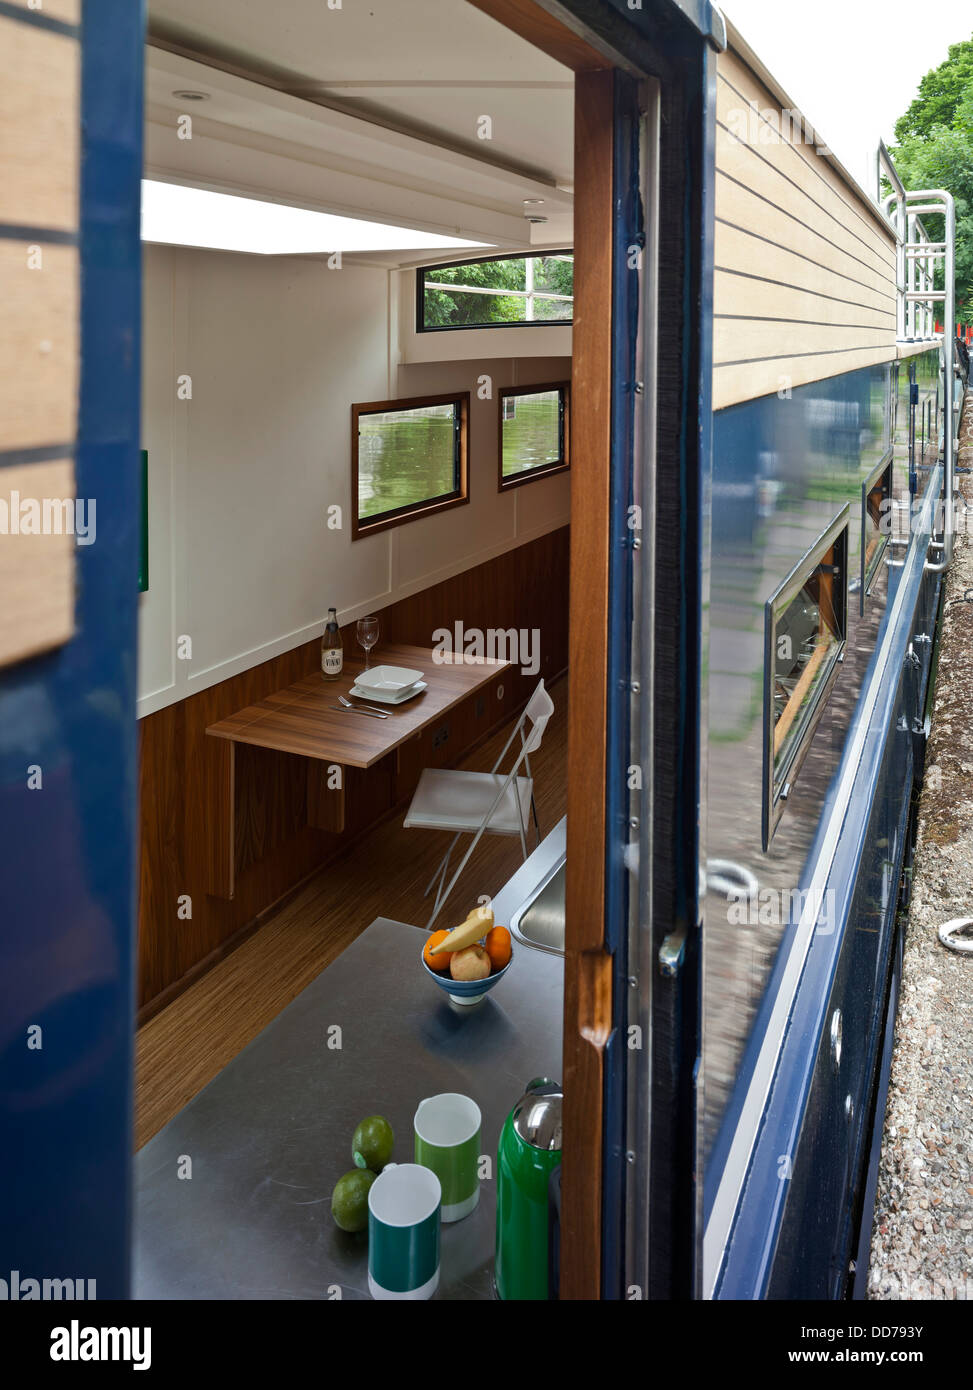 Narrowboat, London, United Kingdom. Architect: Pete Young, 2013. Inside outside view through door showing fold down table. Stock Photo